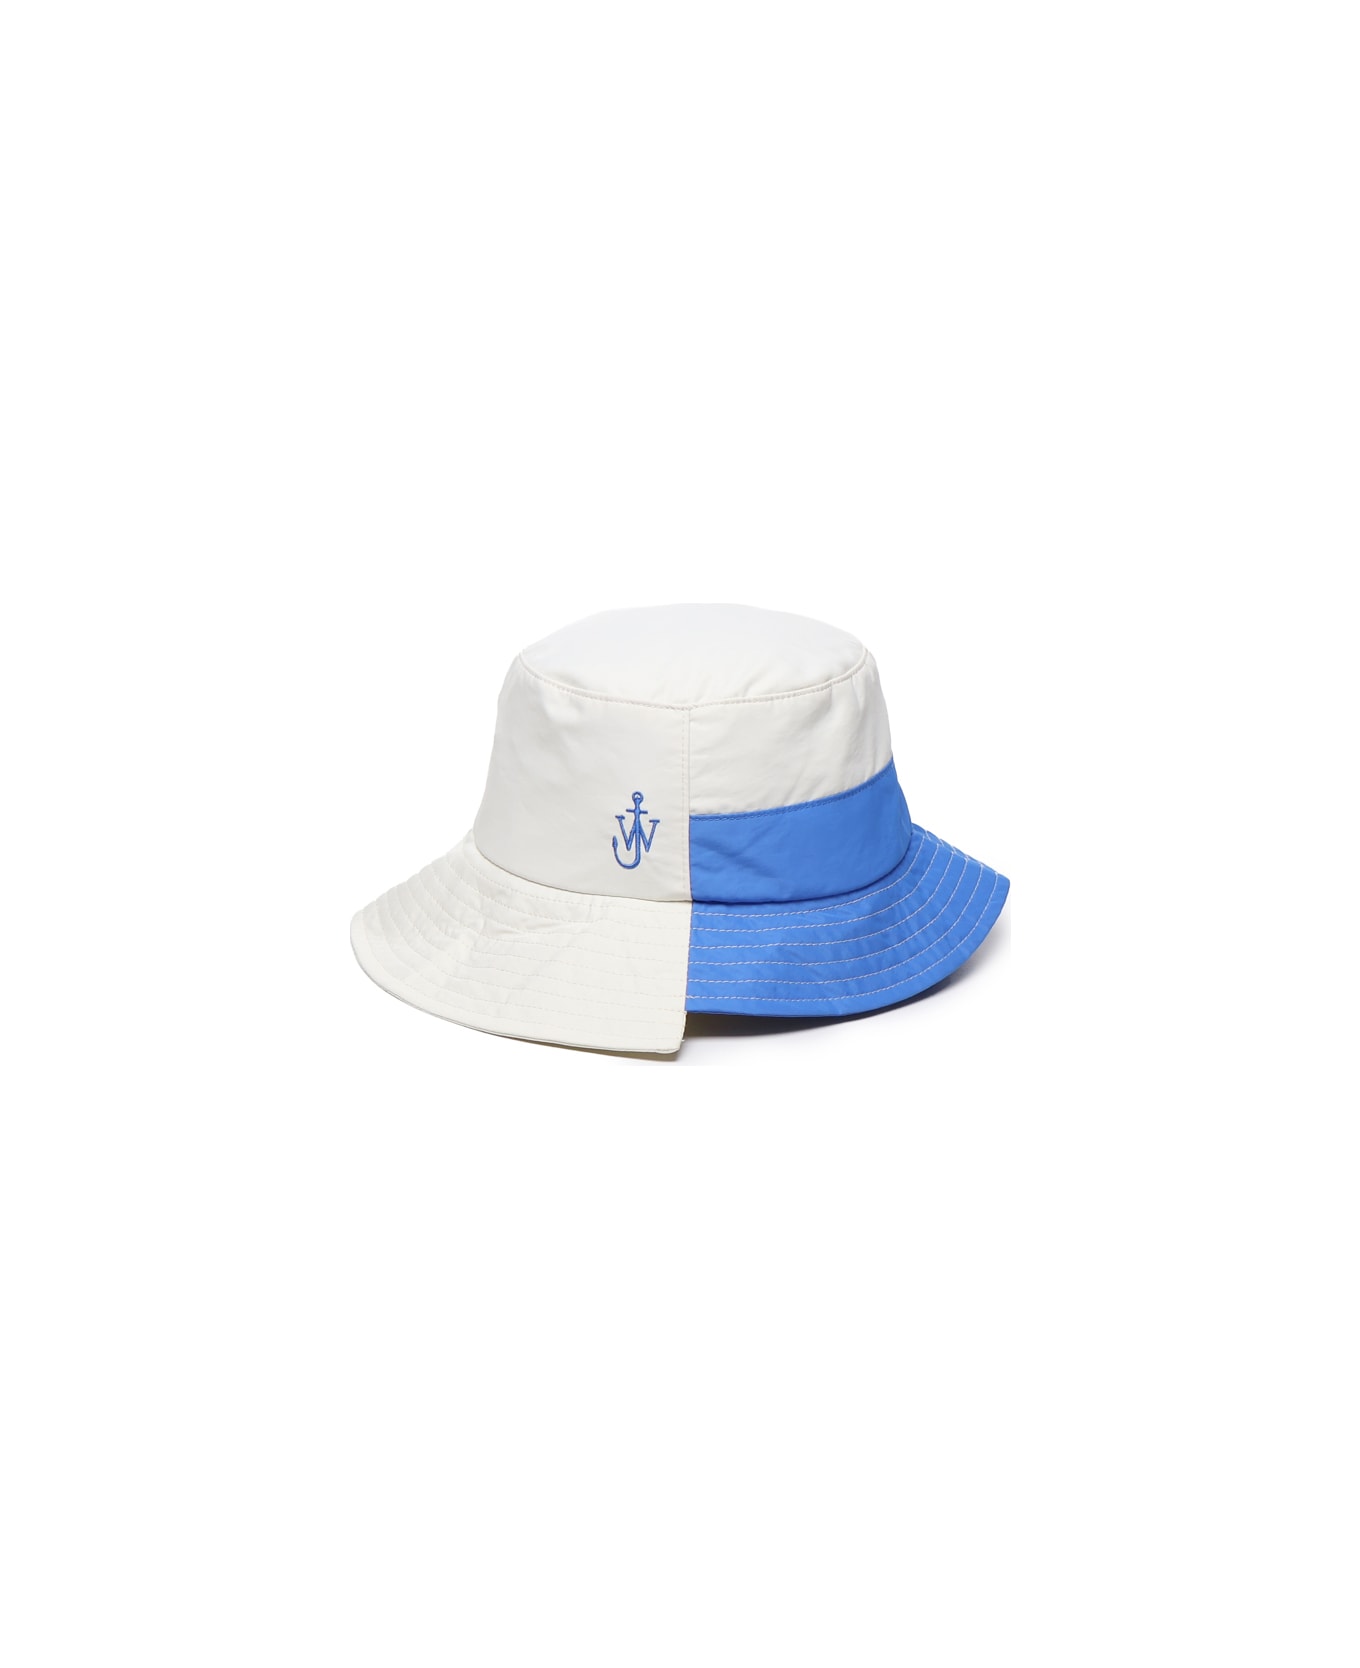 J.W. Anderson Duo Two-tone Bucket Hat - White/blue